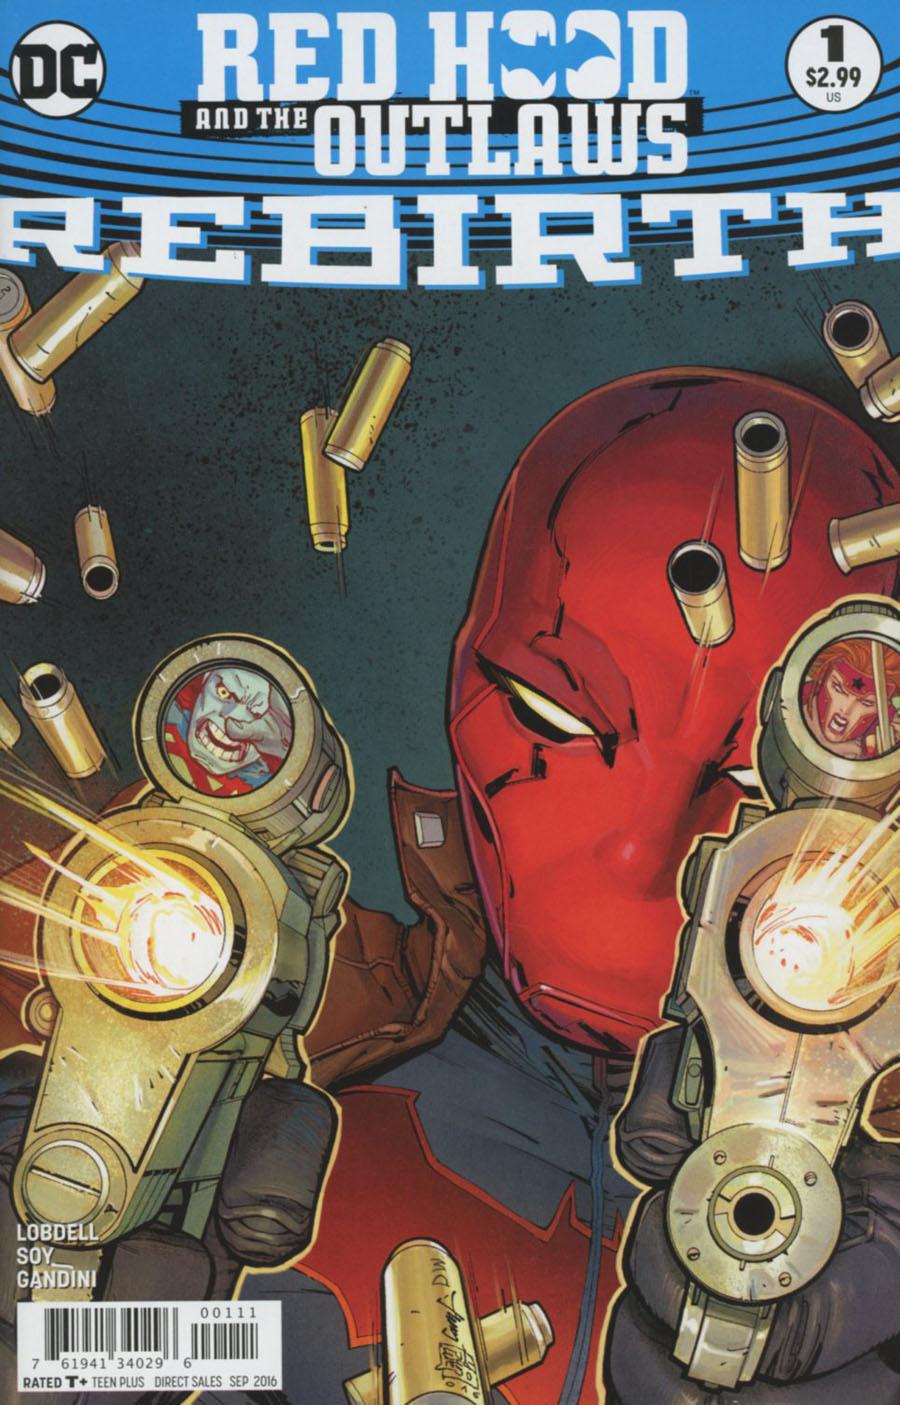 Red Hood And The Outlaws Rebirth Vol. 1 #1